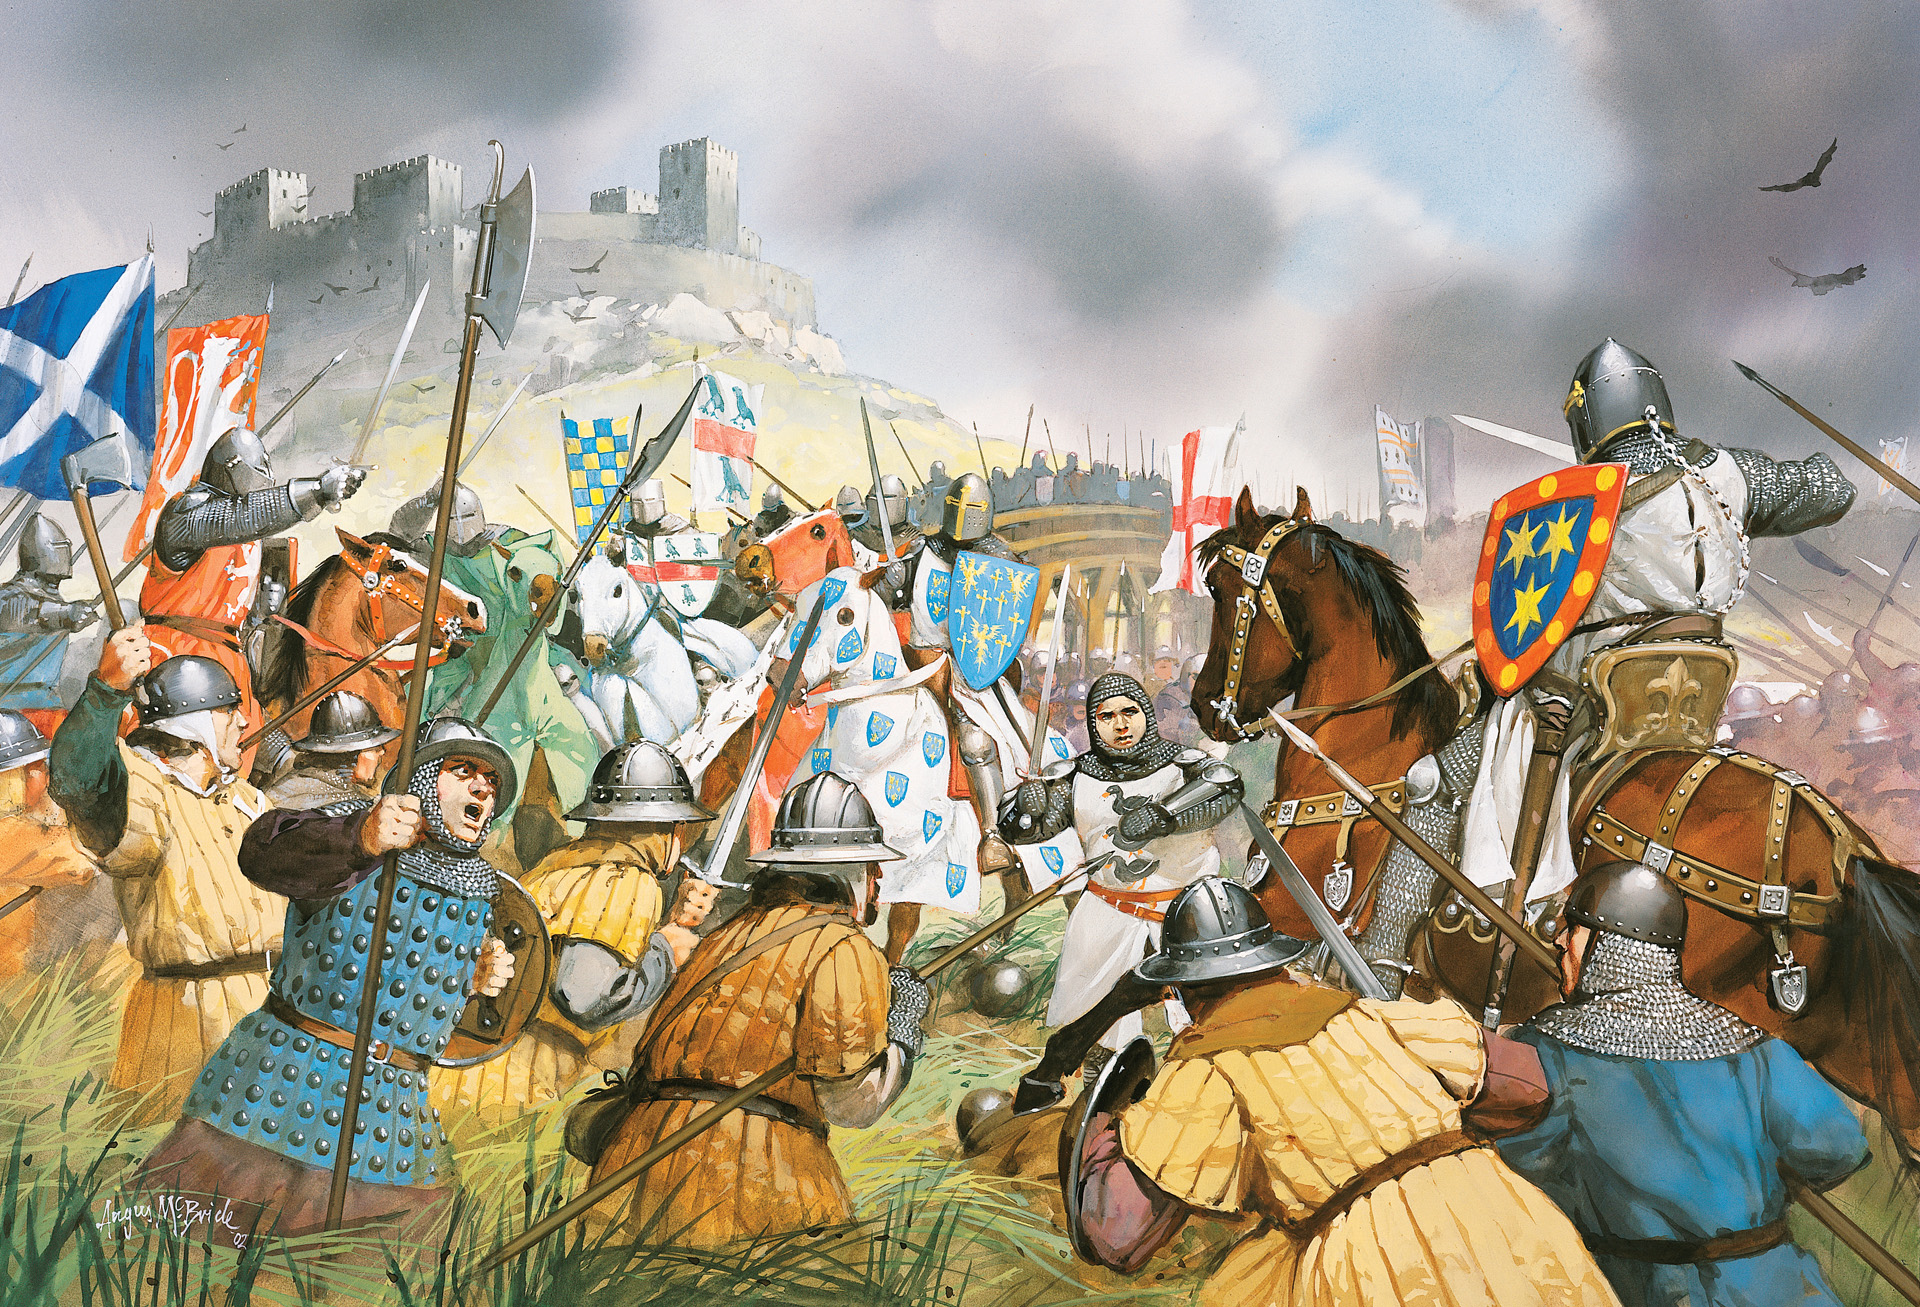 The inept leadership of John De Warenne led to the English disaster at Stirling Bridge. From their position on Abbey Crag, the Scots carried everything before them wiping out the English bridgehead on the north bank of the River Forth. Painting by Angus McBride